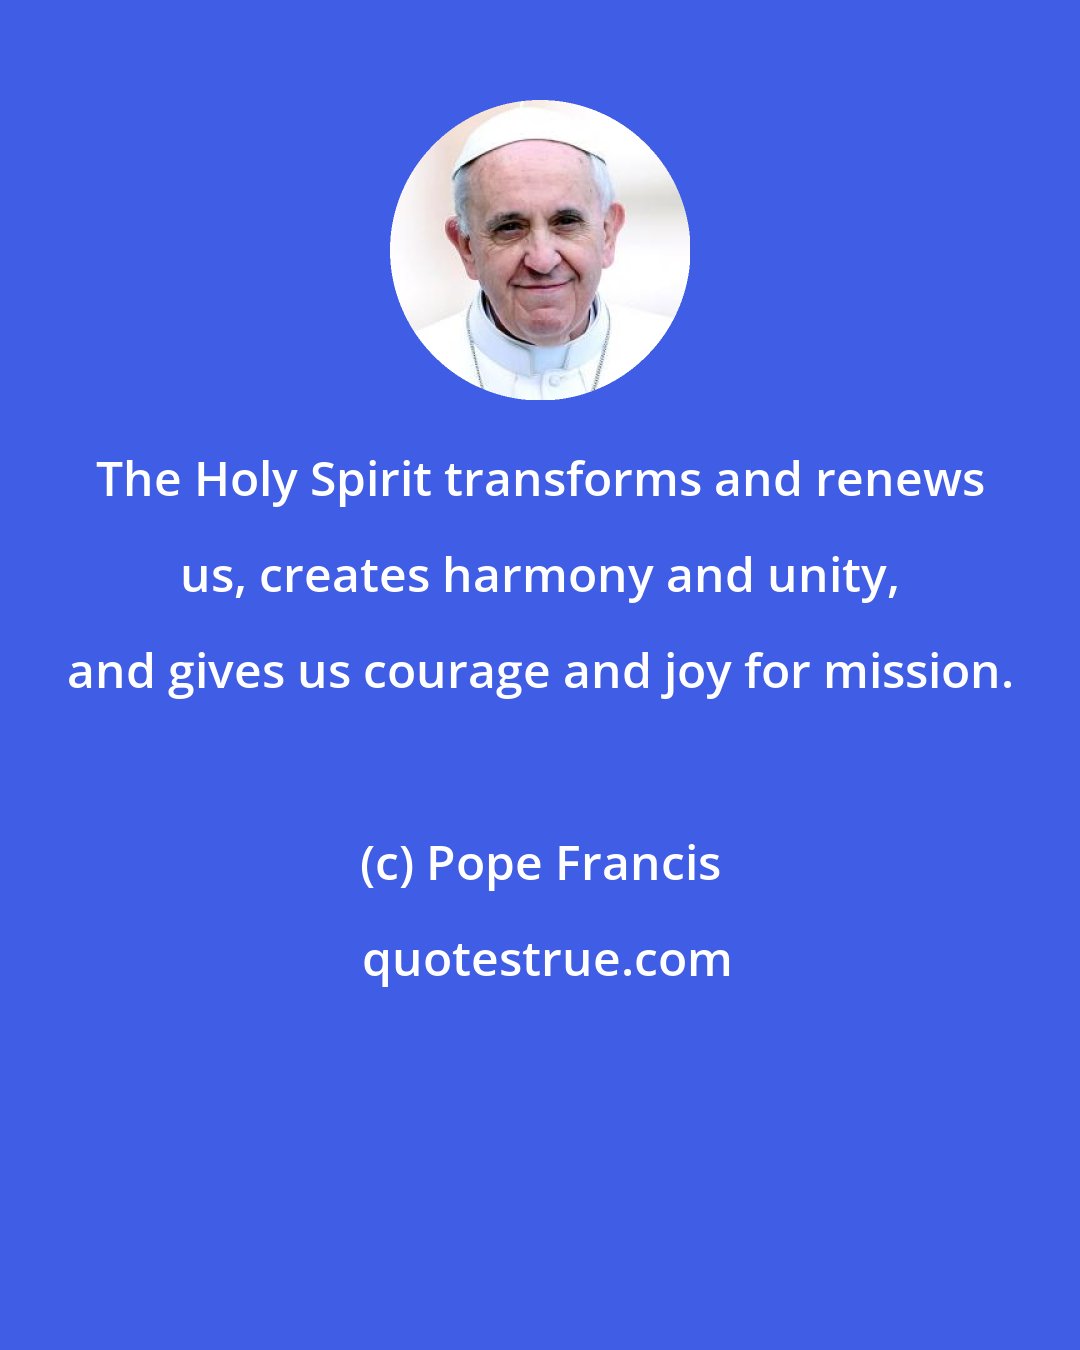 Pope Francis: The Holy Spirit transforms and renews us, creates harmony and unity, and gives us courage and joy for mission.